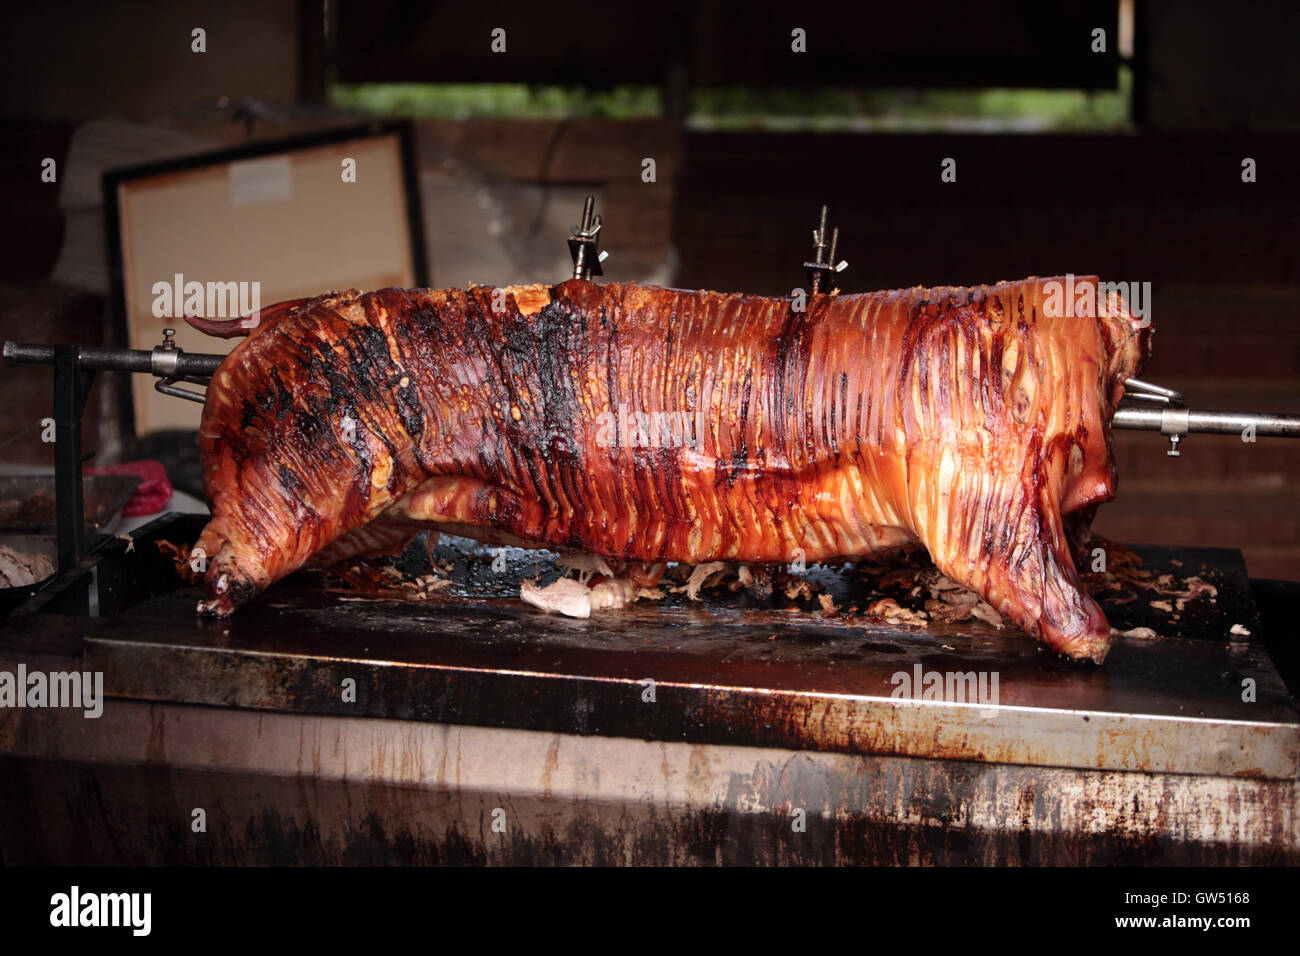 A hog roast on a rotisserie almost ready for carving Stock Photo